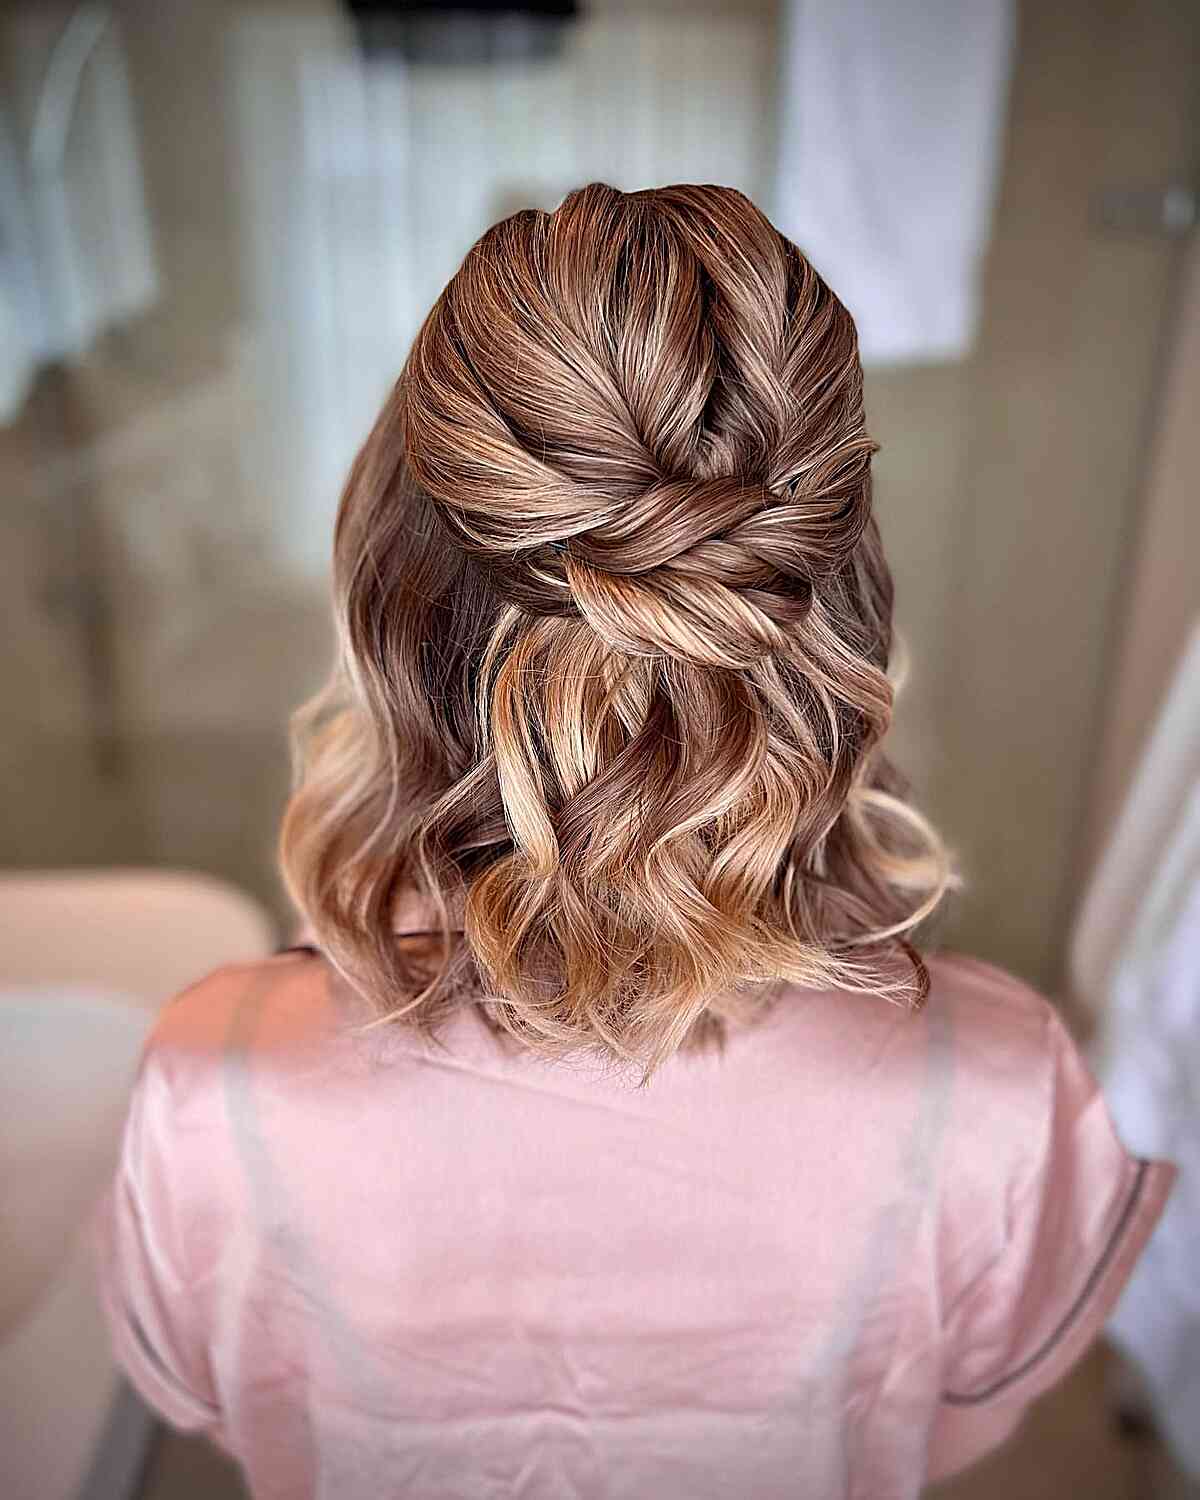 27 Perfect Prom Hair Styles For Short, Medium, And Long Hair